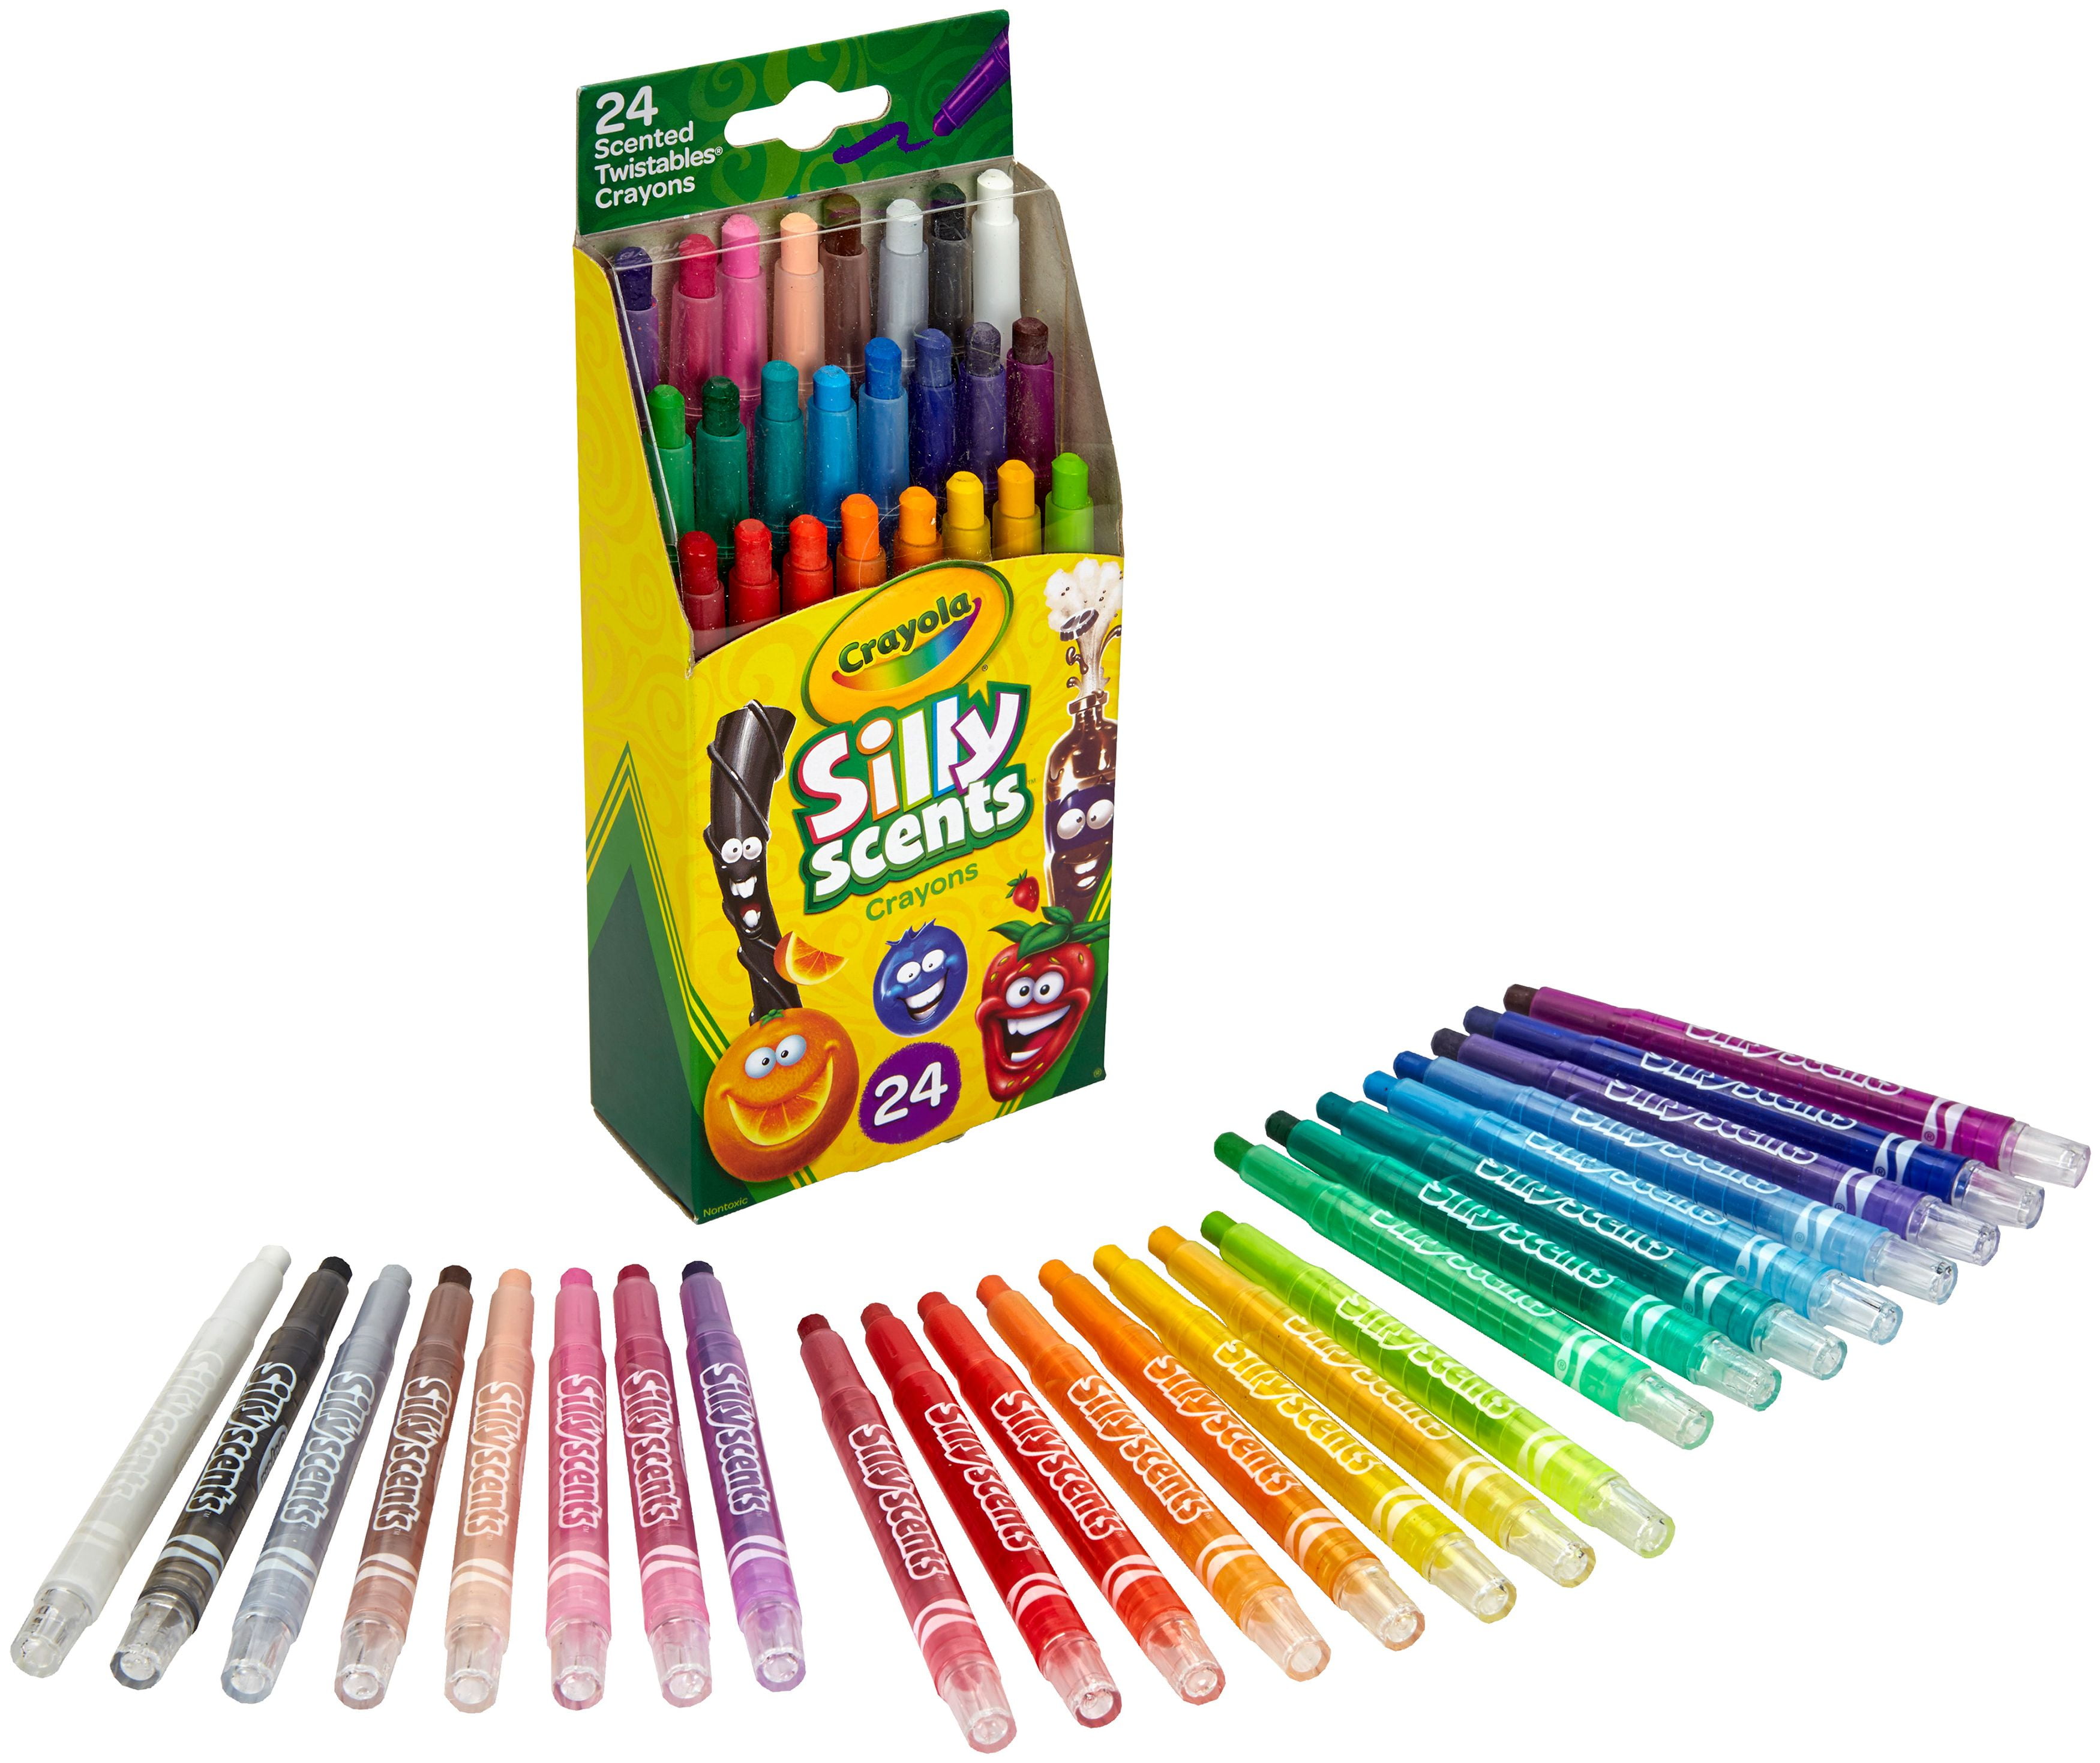 Crayola Silly Scents Twistables Crayons, Sweet Scented Crayons for Kids, 24 Count - image 1 of 8